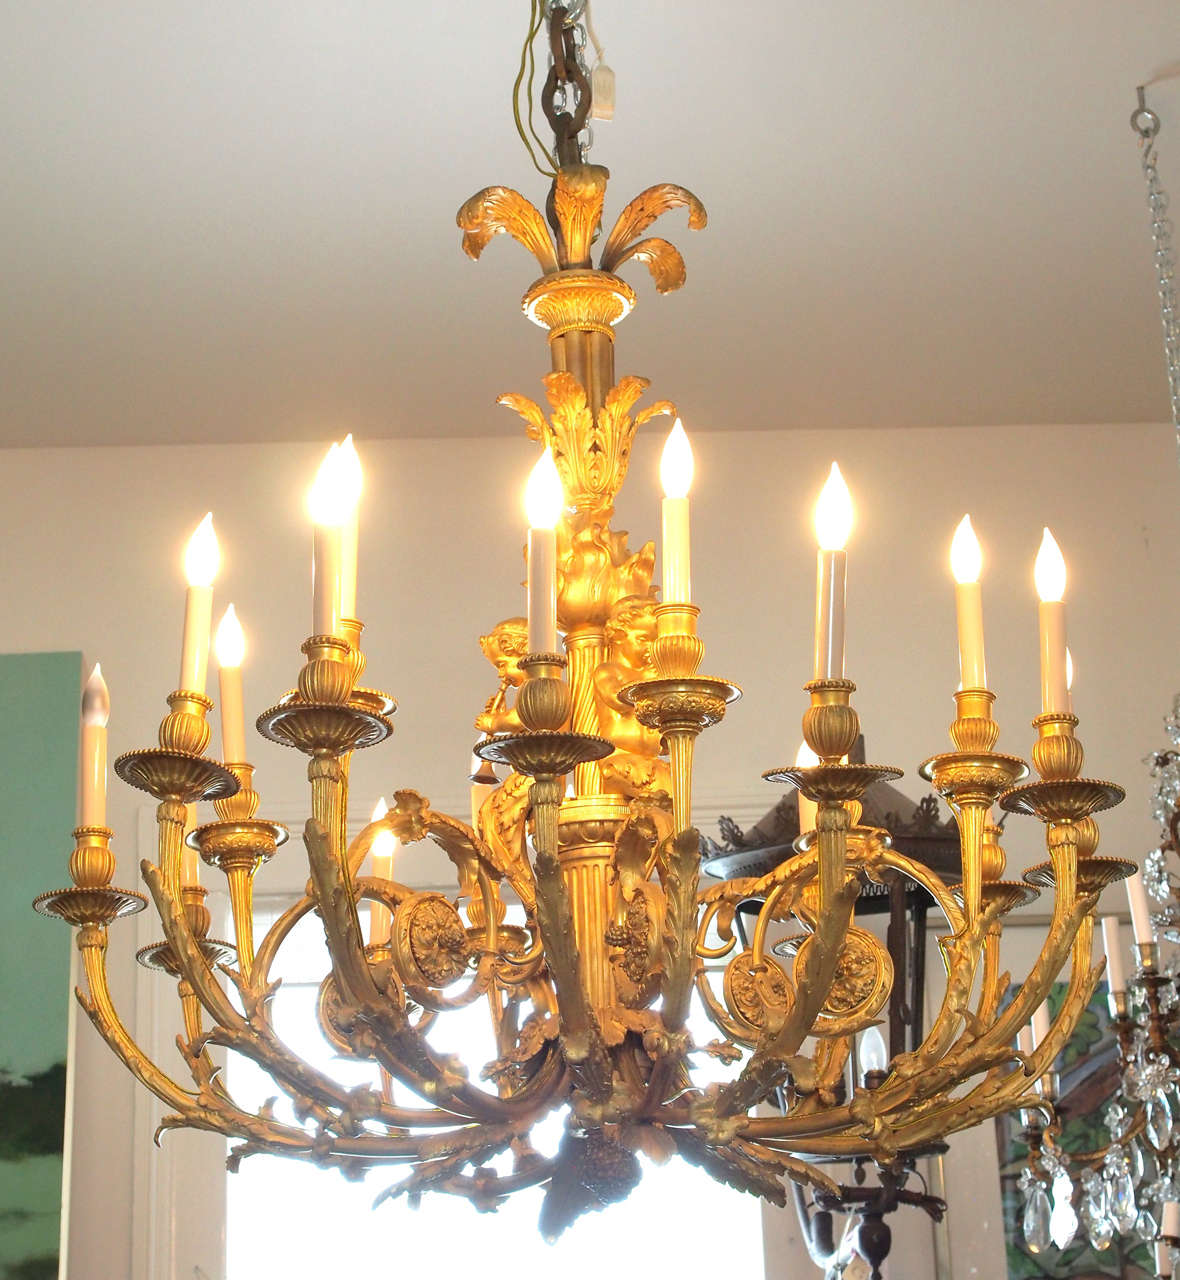 Large, bronze chandelier with cherub decoration and 18 lights